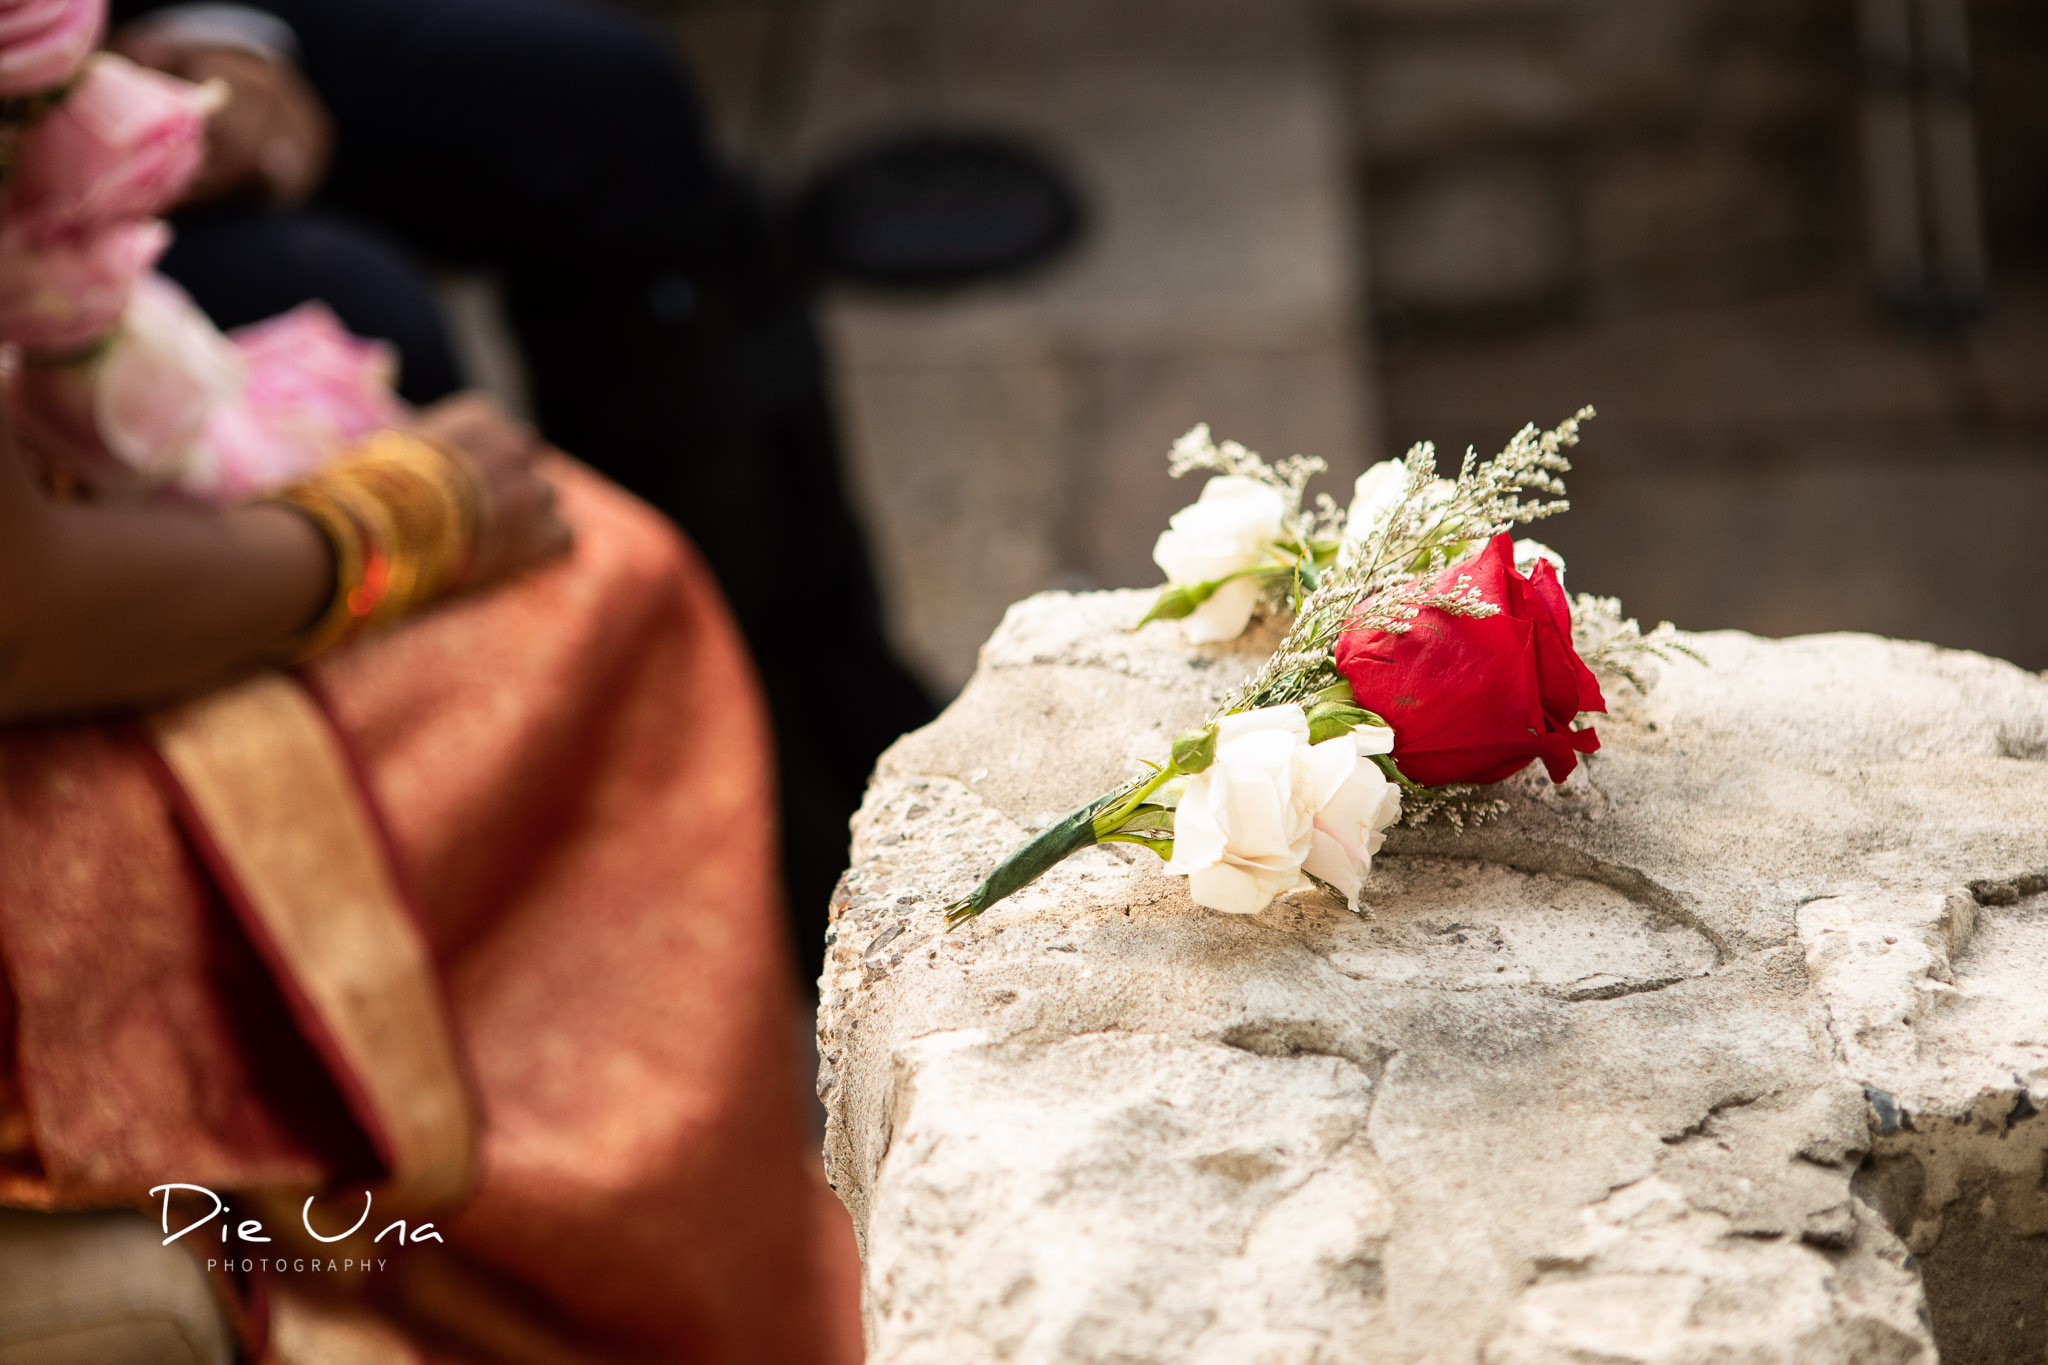 small hand held wedding bouquet resting on rock ledge during wedding ceremony.jpg